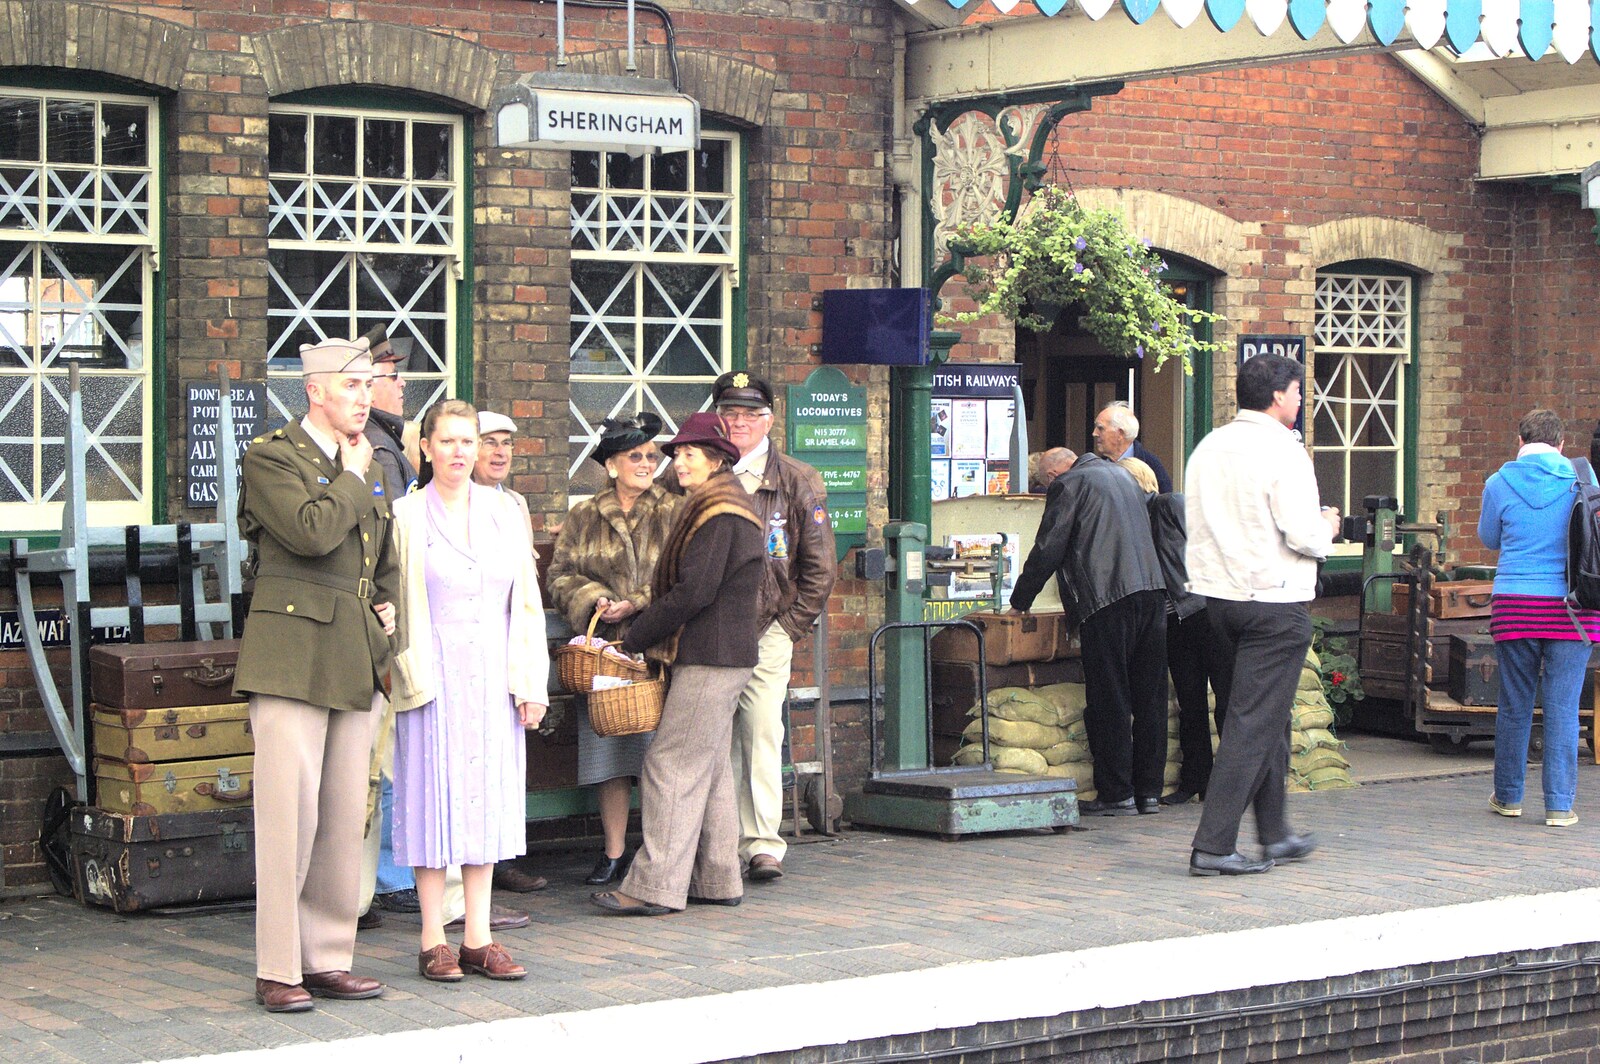 More 40s action on the platforn from A 1940s Steam Weekend, Holt and Sheringham, Norfolk - 18th September 2010